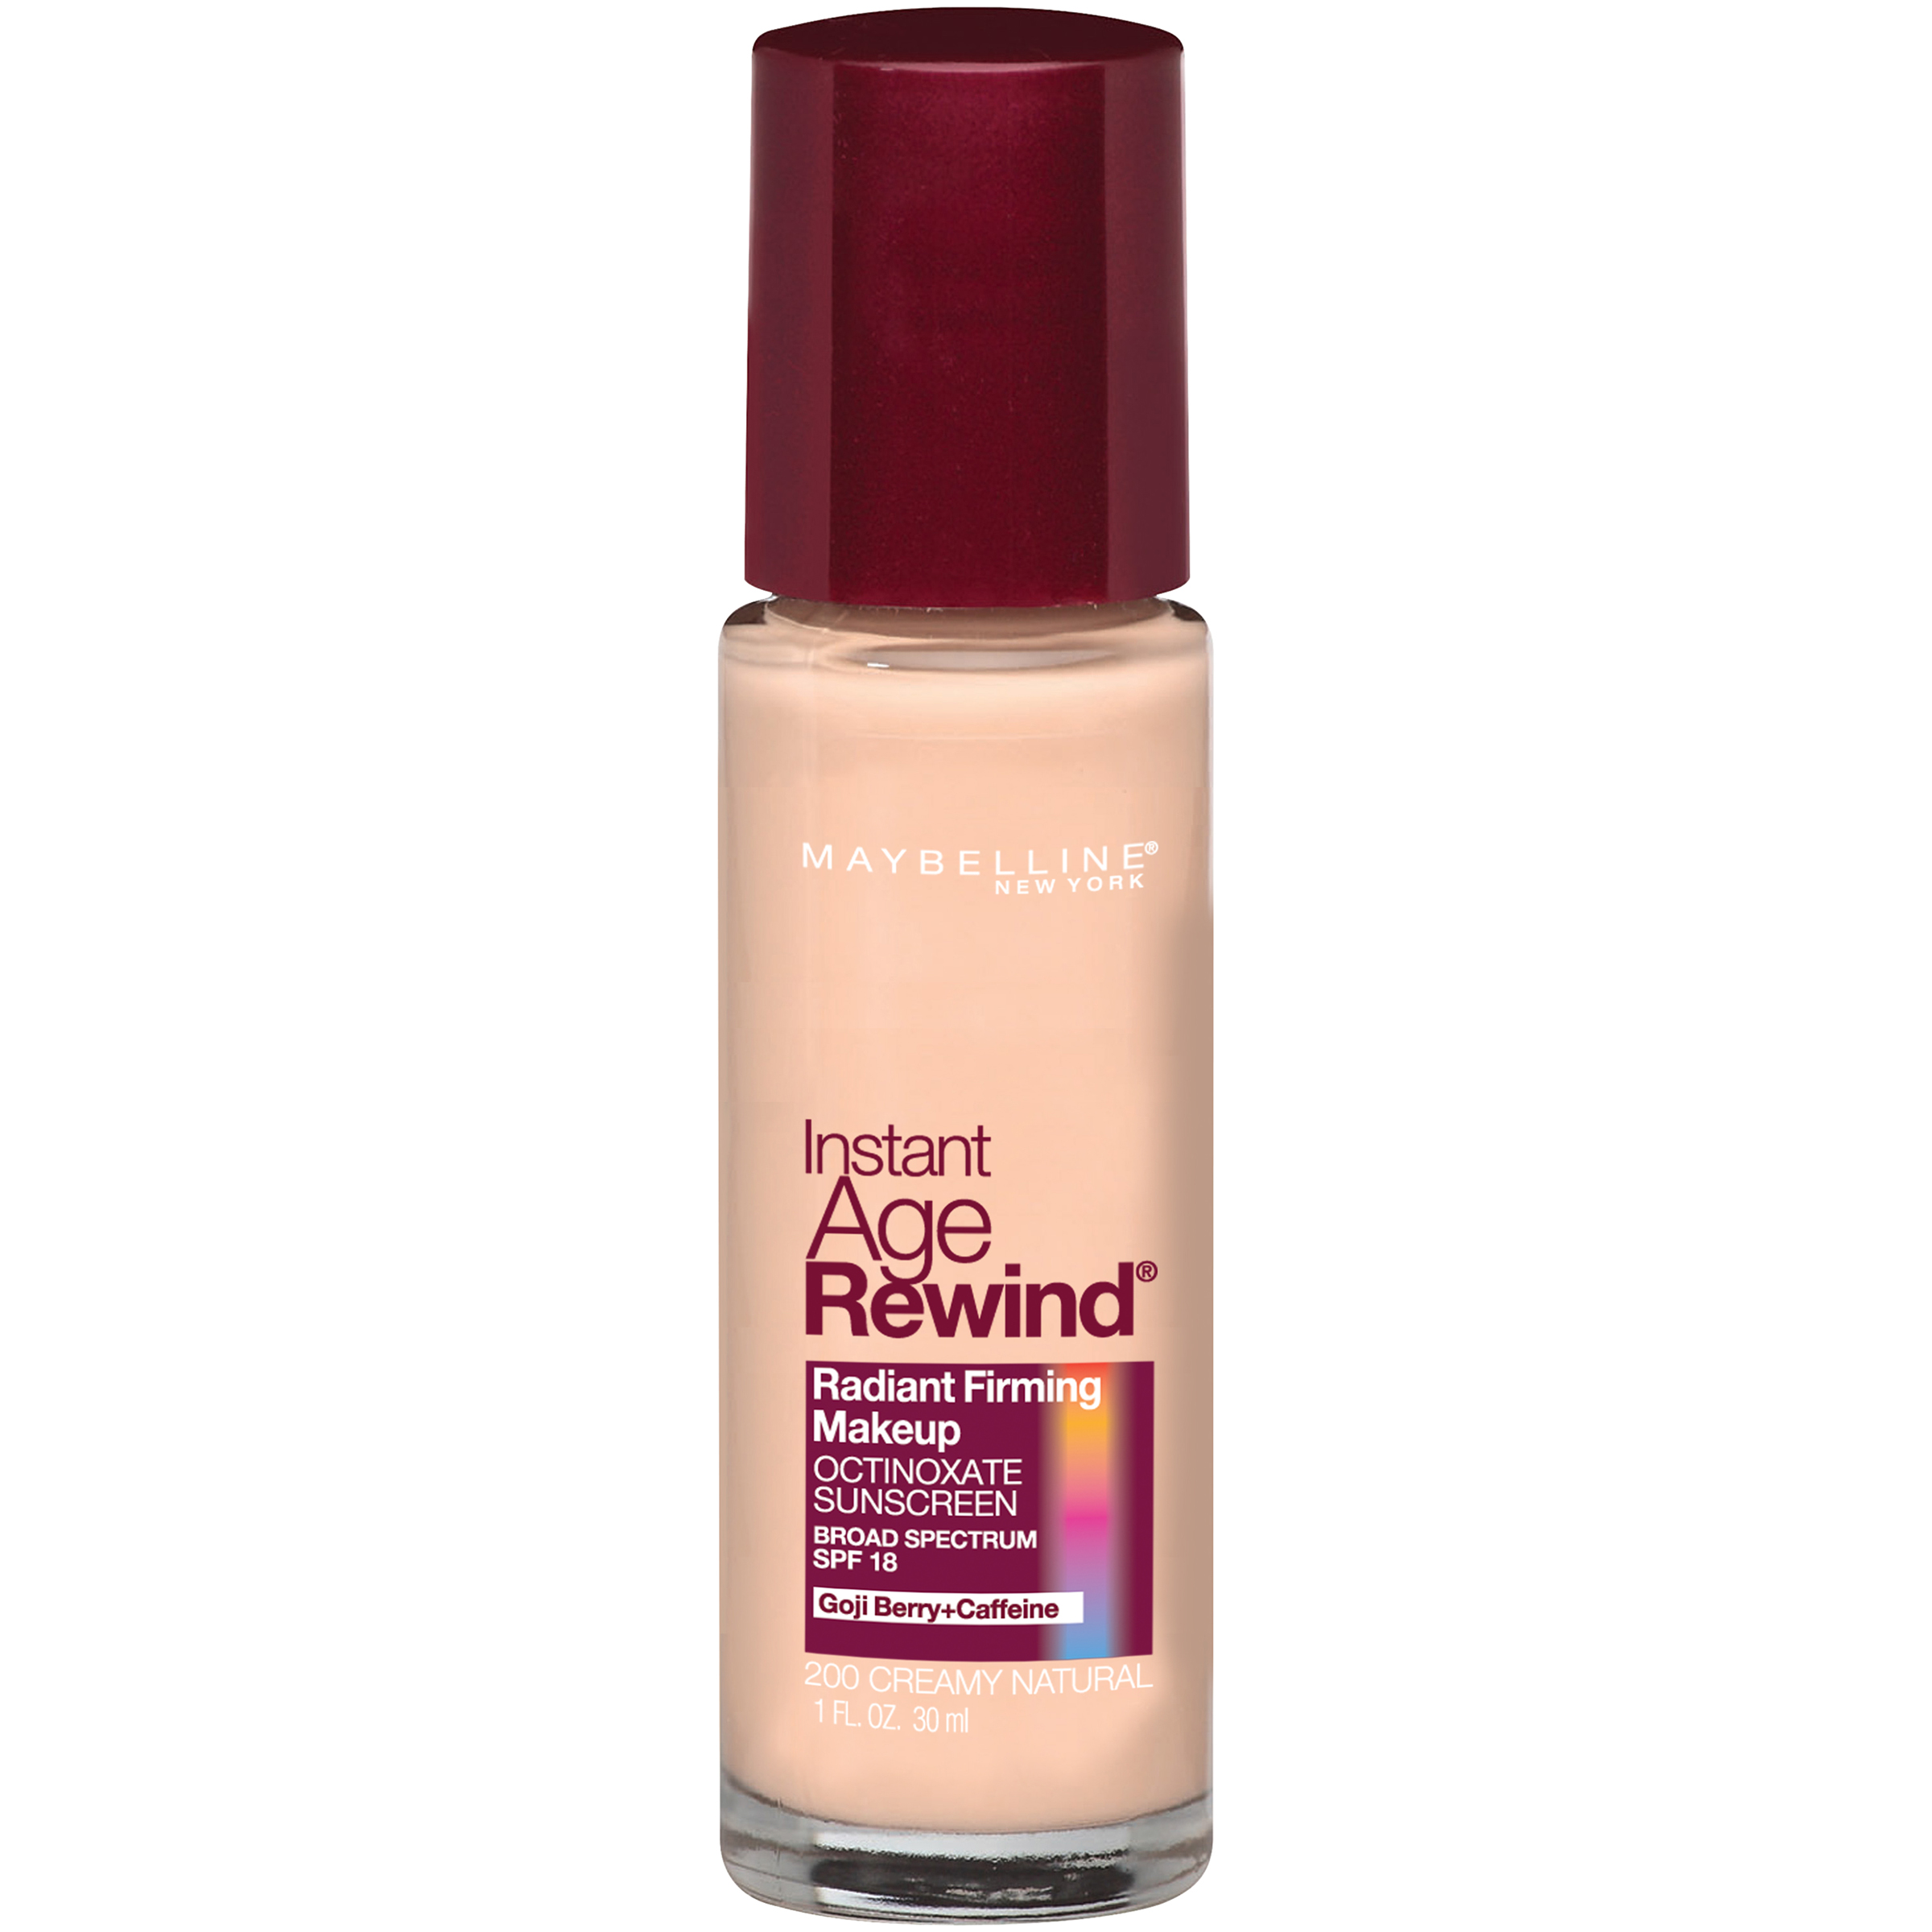 Maybelline New York Instant Age Rewind Radiant Firming Makeup